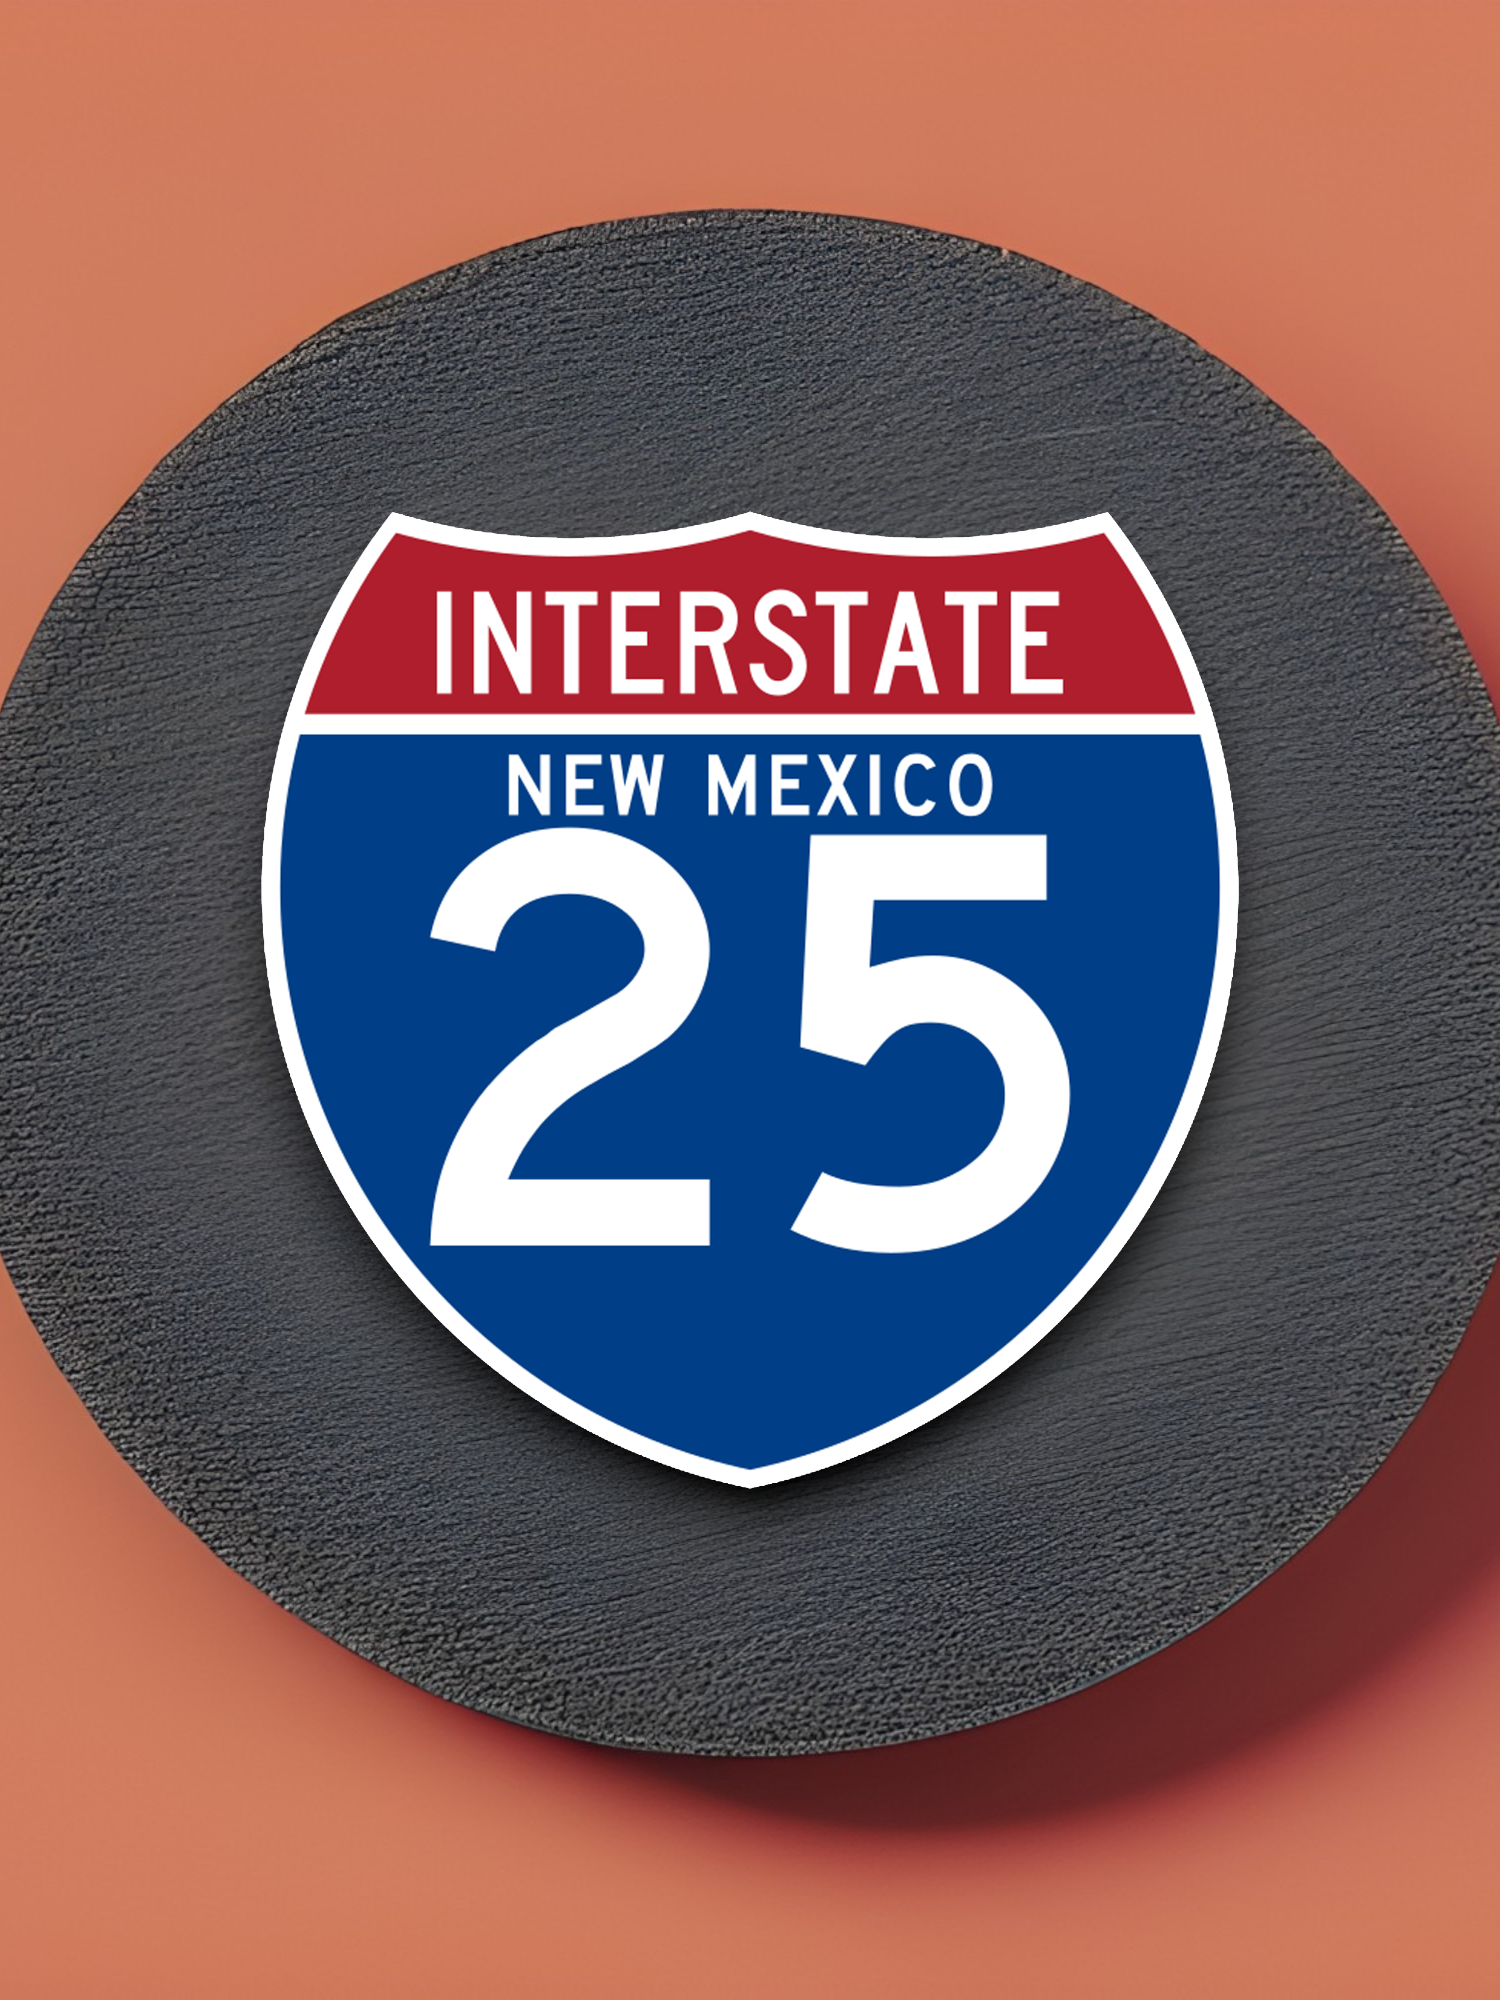 Interstate I-25 New Mexico - Road Sign Sticker